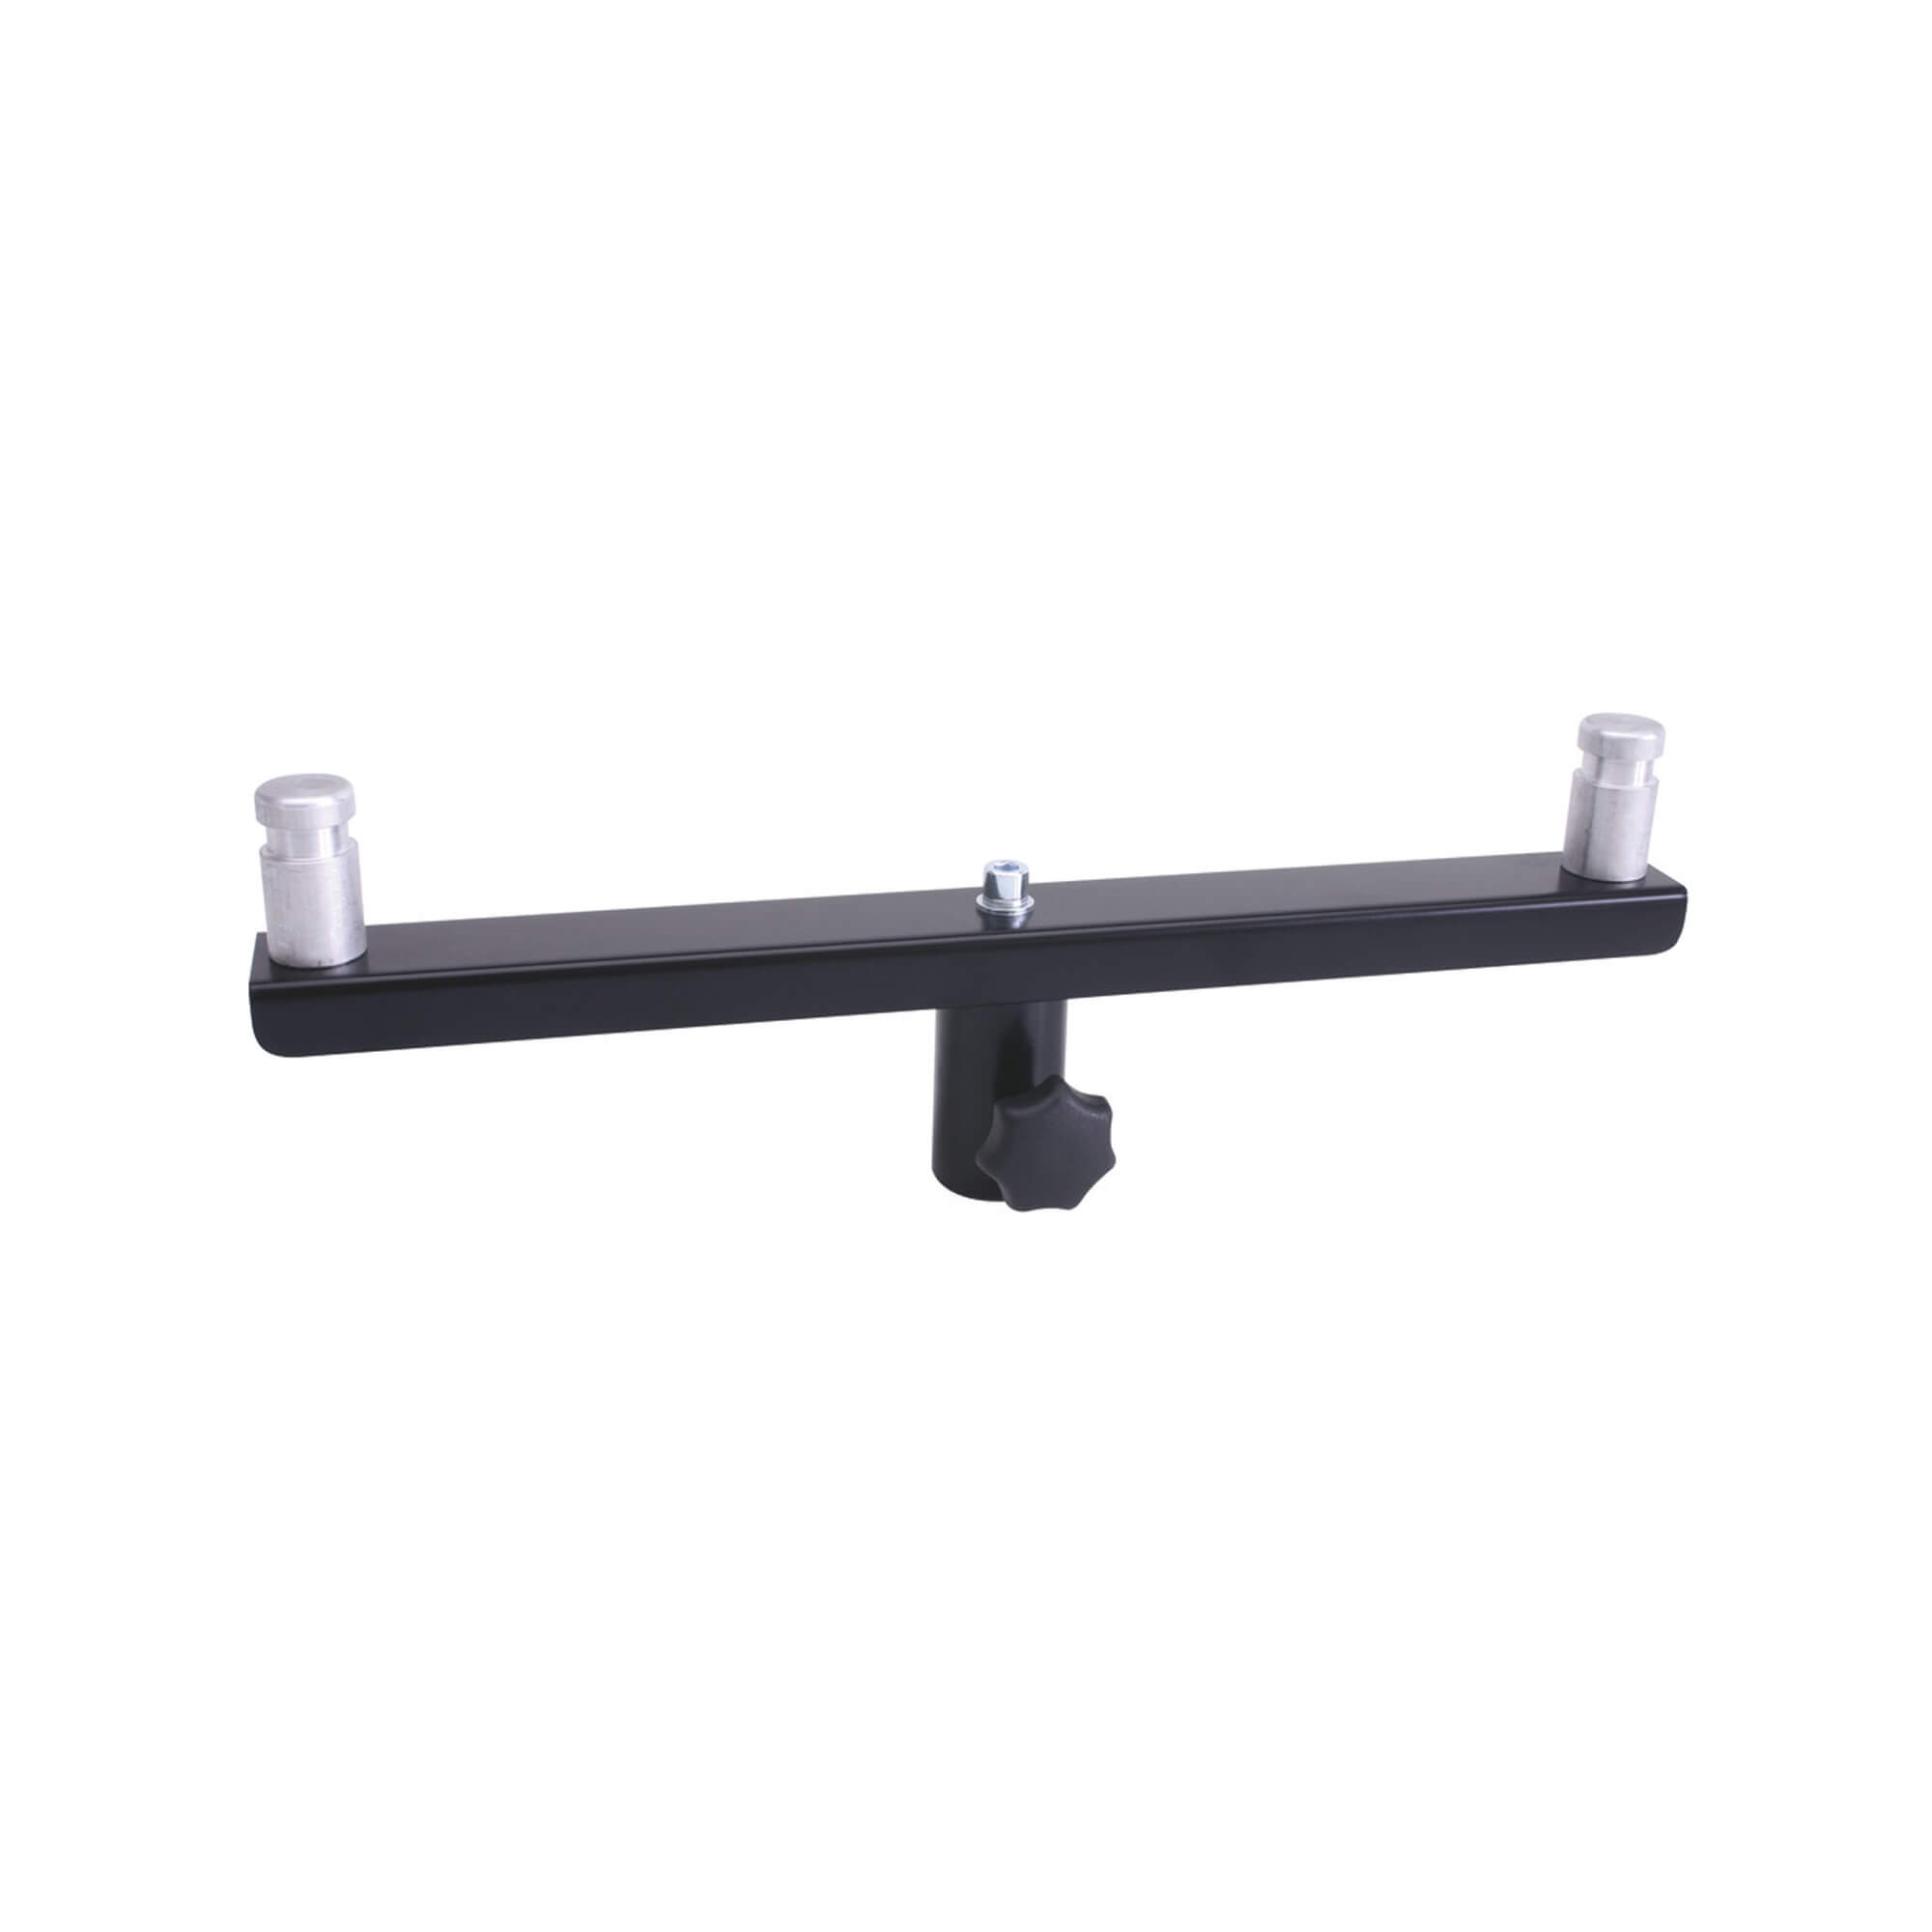 T Carrier for two area lights, 350 mm length